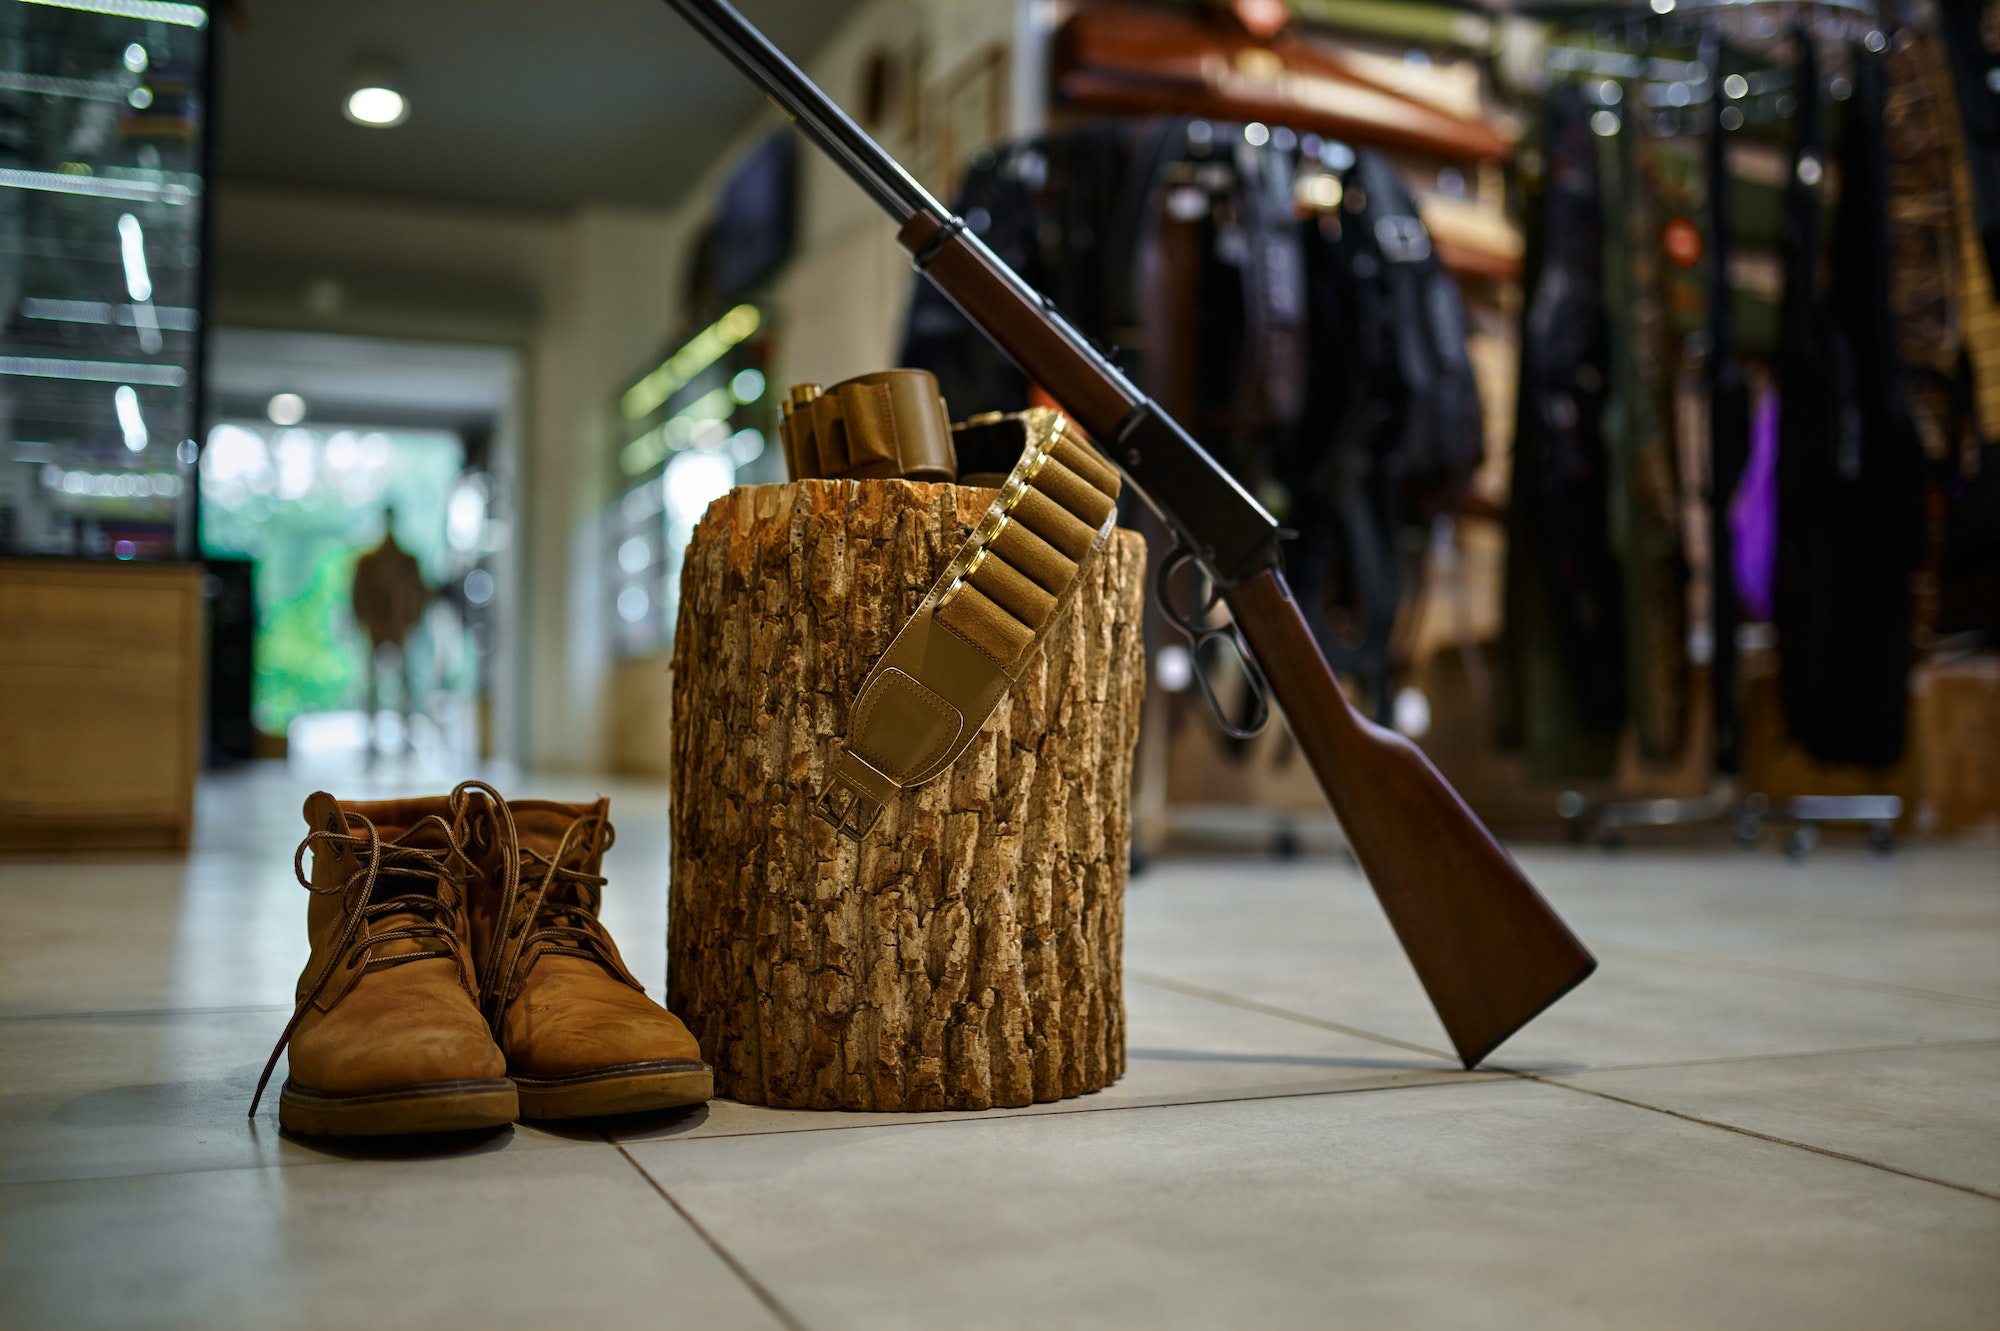 Rifle and hunting boots at the stump in gun store